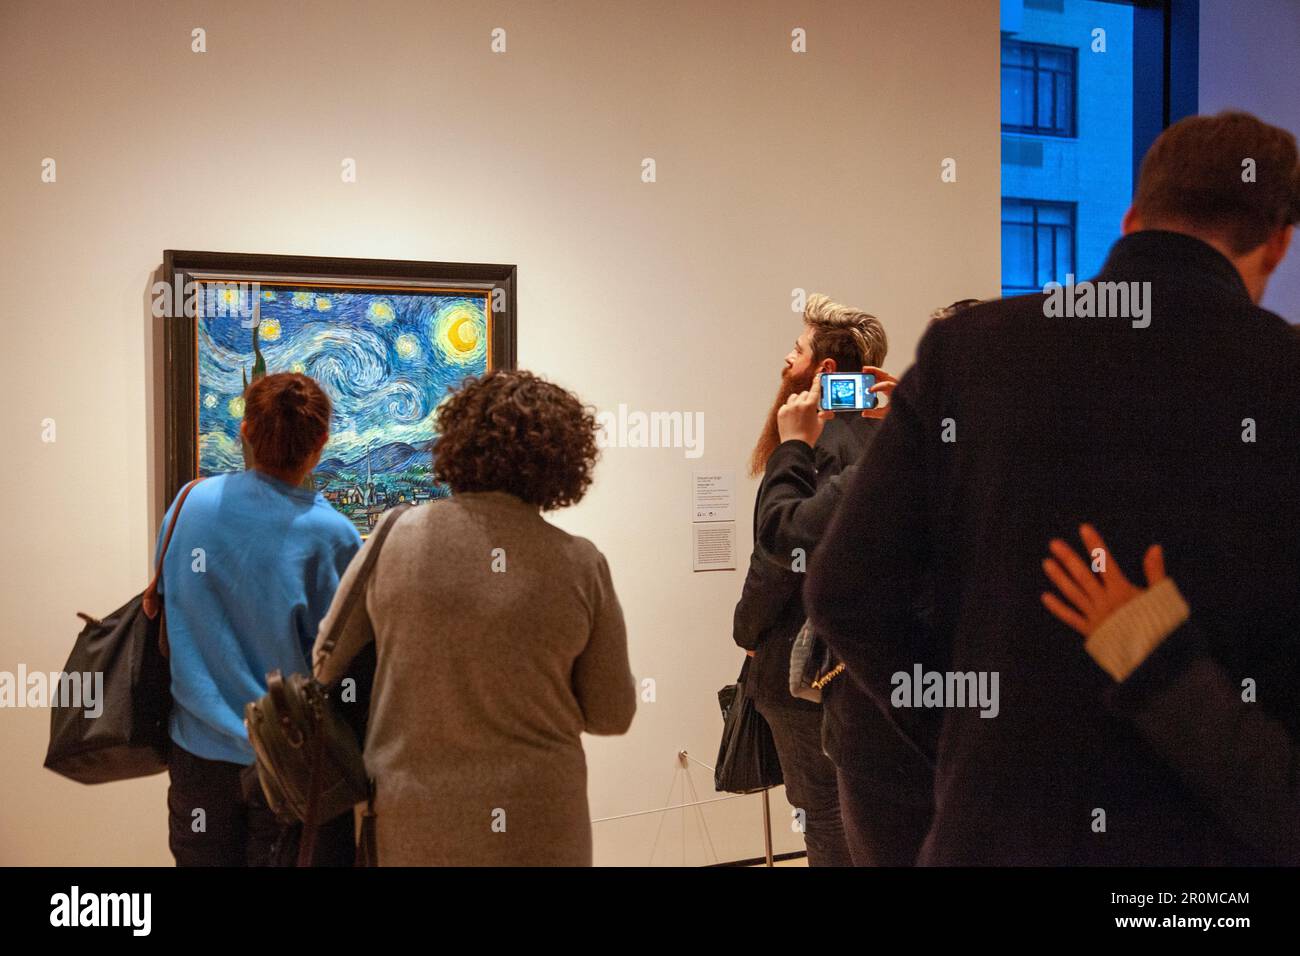 Visitors Stand Around Van Gogh's Painting 'The Starry Night' at MOMA in New Yor, USA Stock Photo